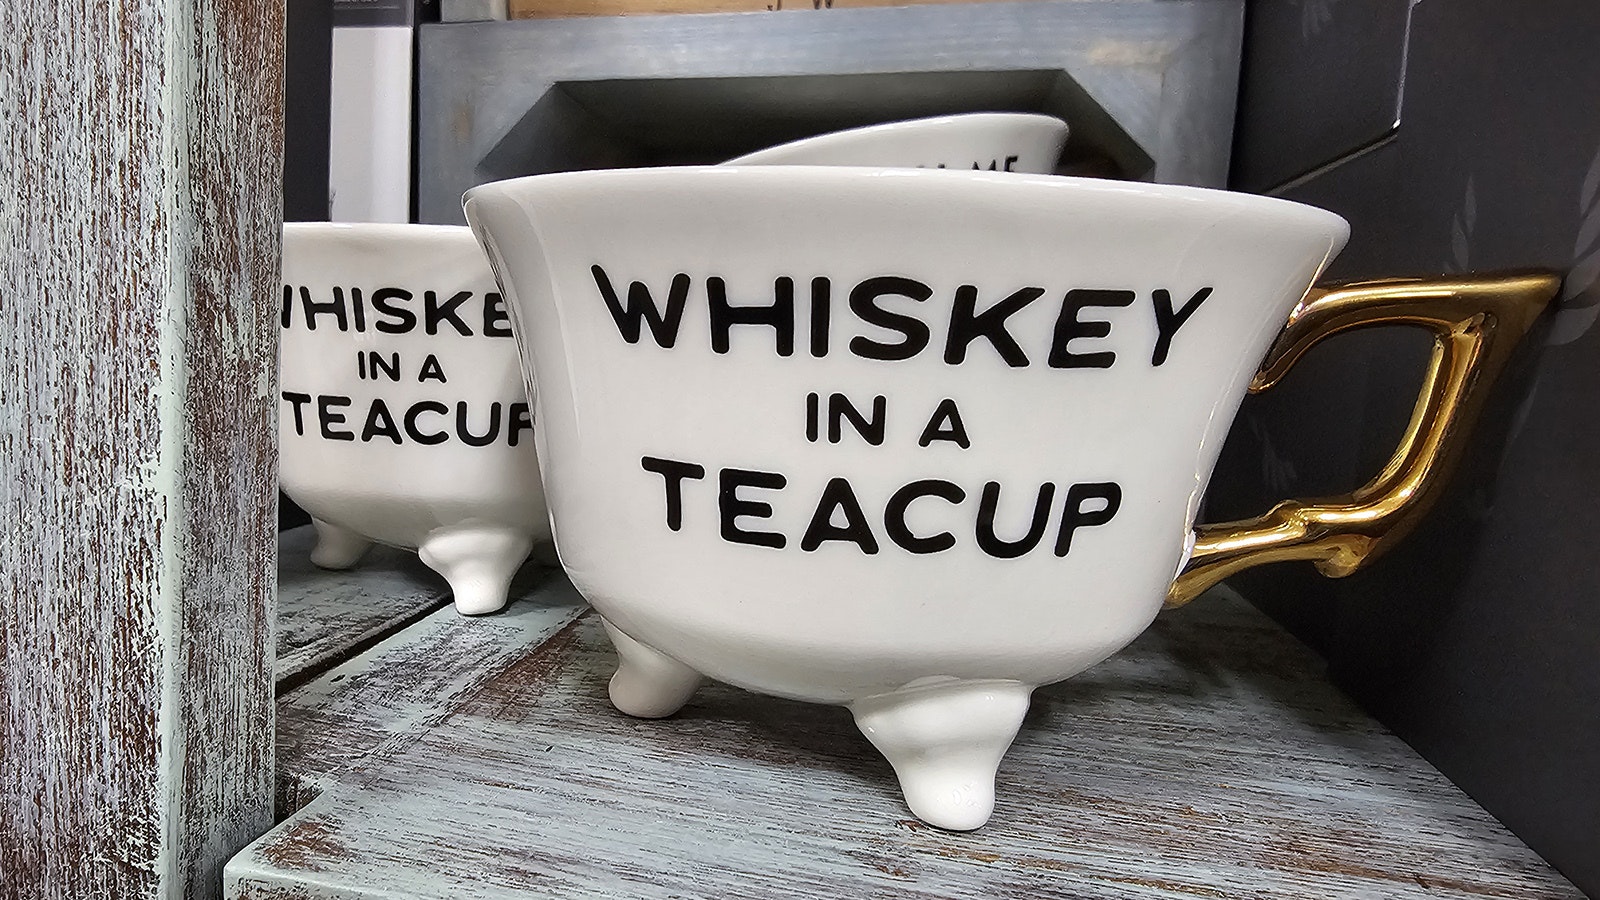 Or, you could just drink your whiskey from a teacup.